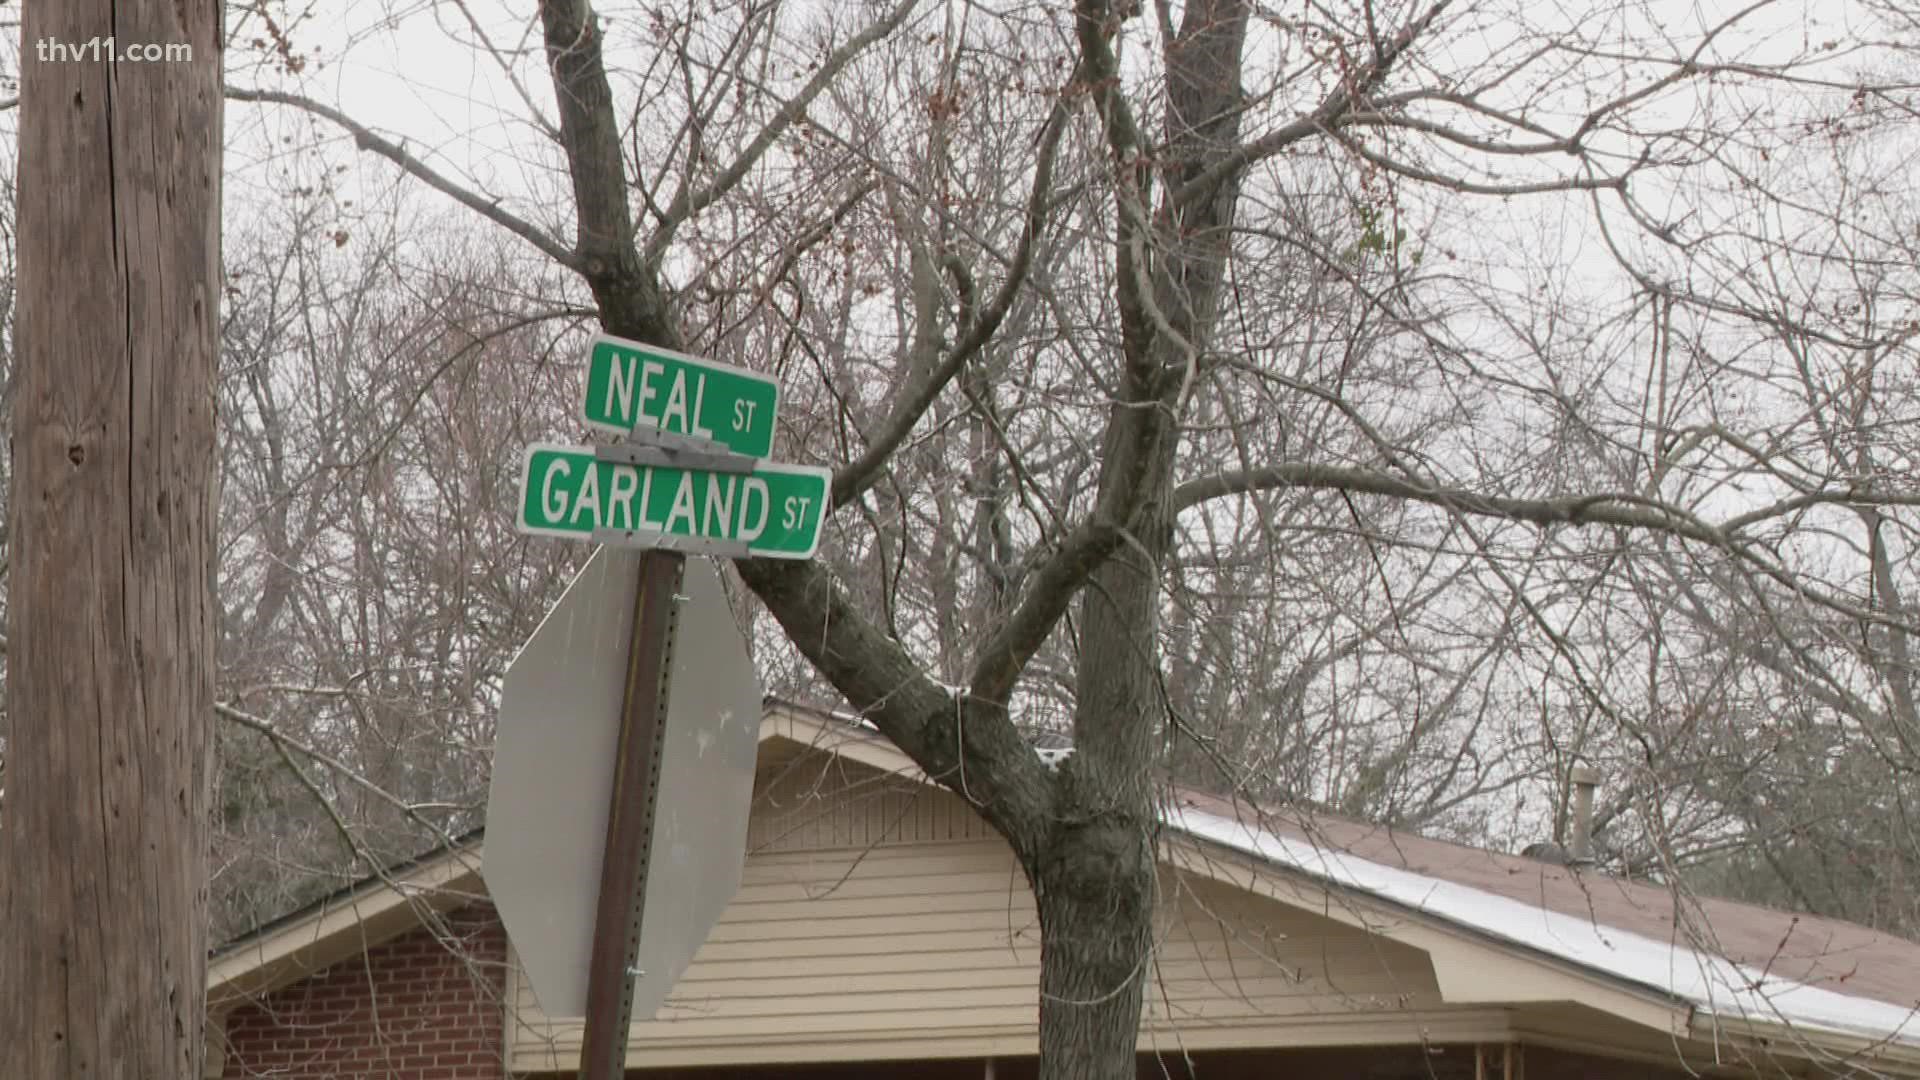 Conway police are investigating a shooting that happened at the intersection of Neal and Garland Street, leaving one person dead early Saturday morning.